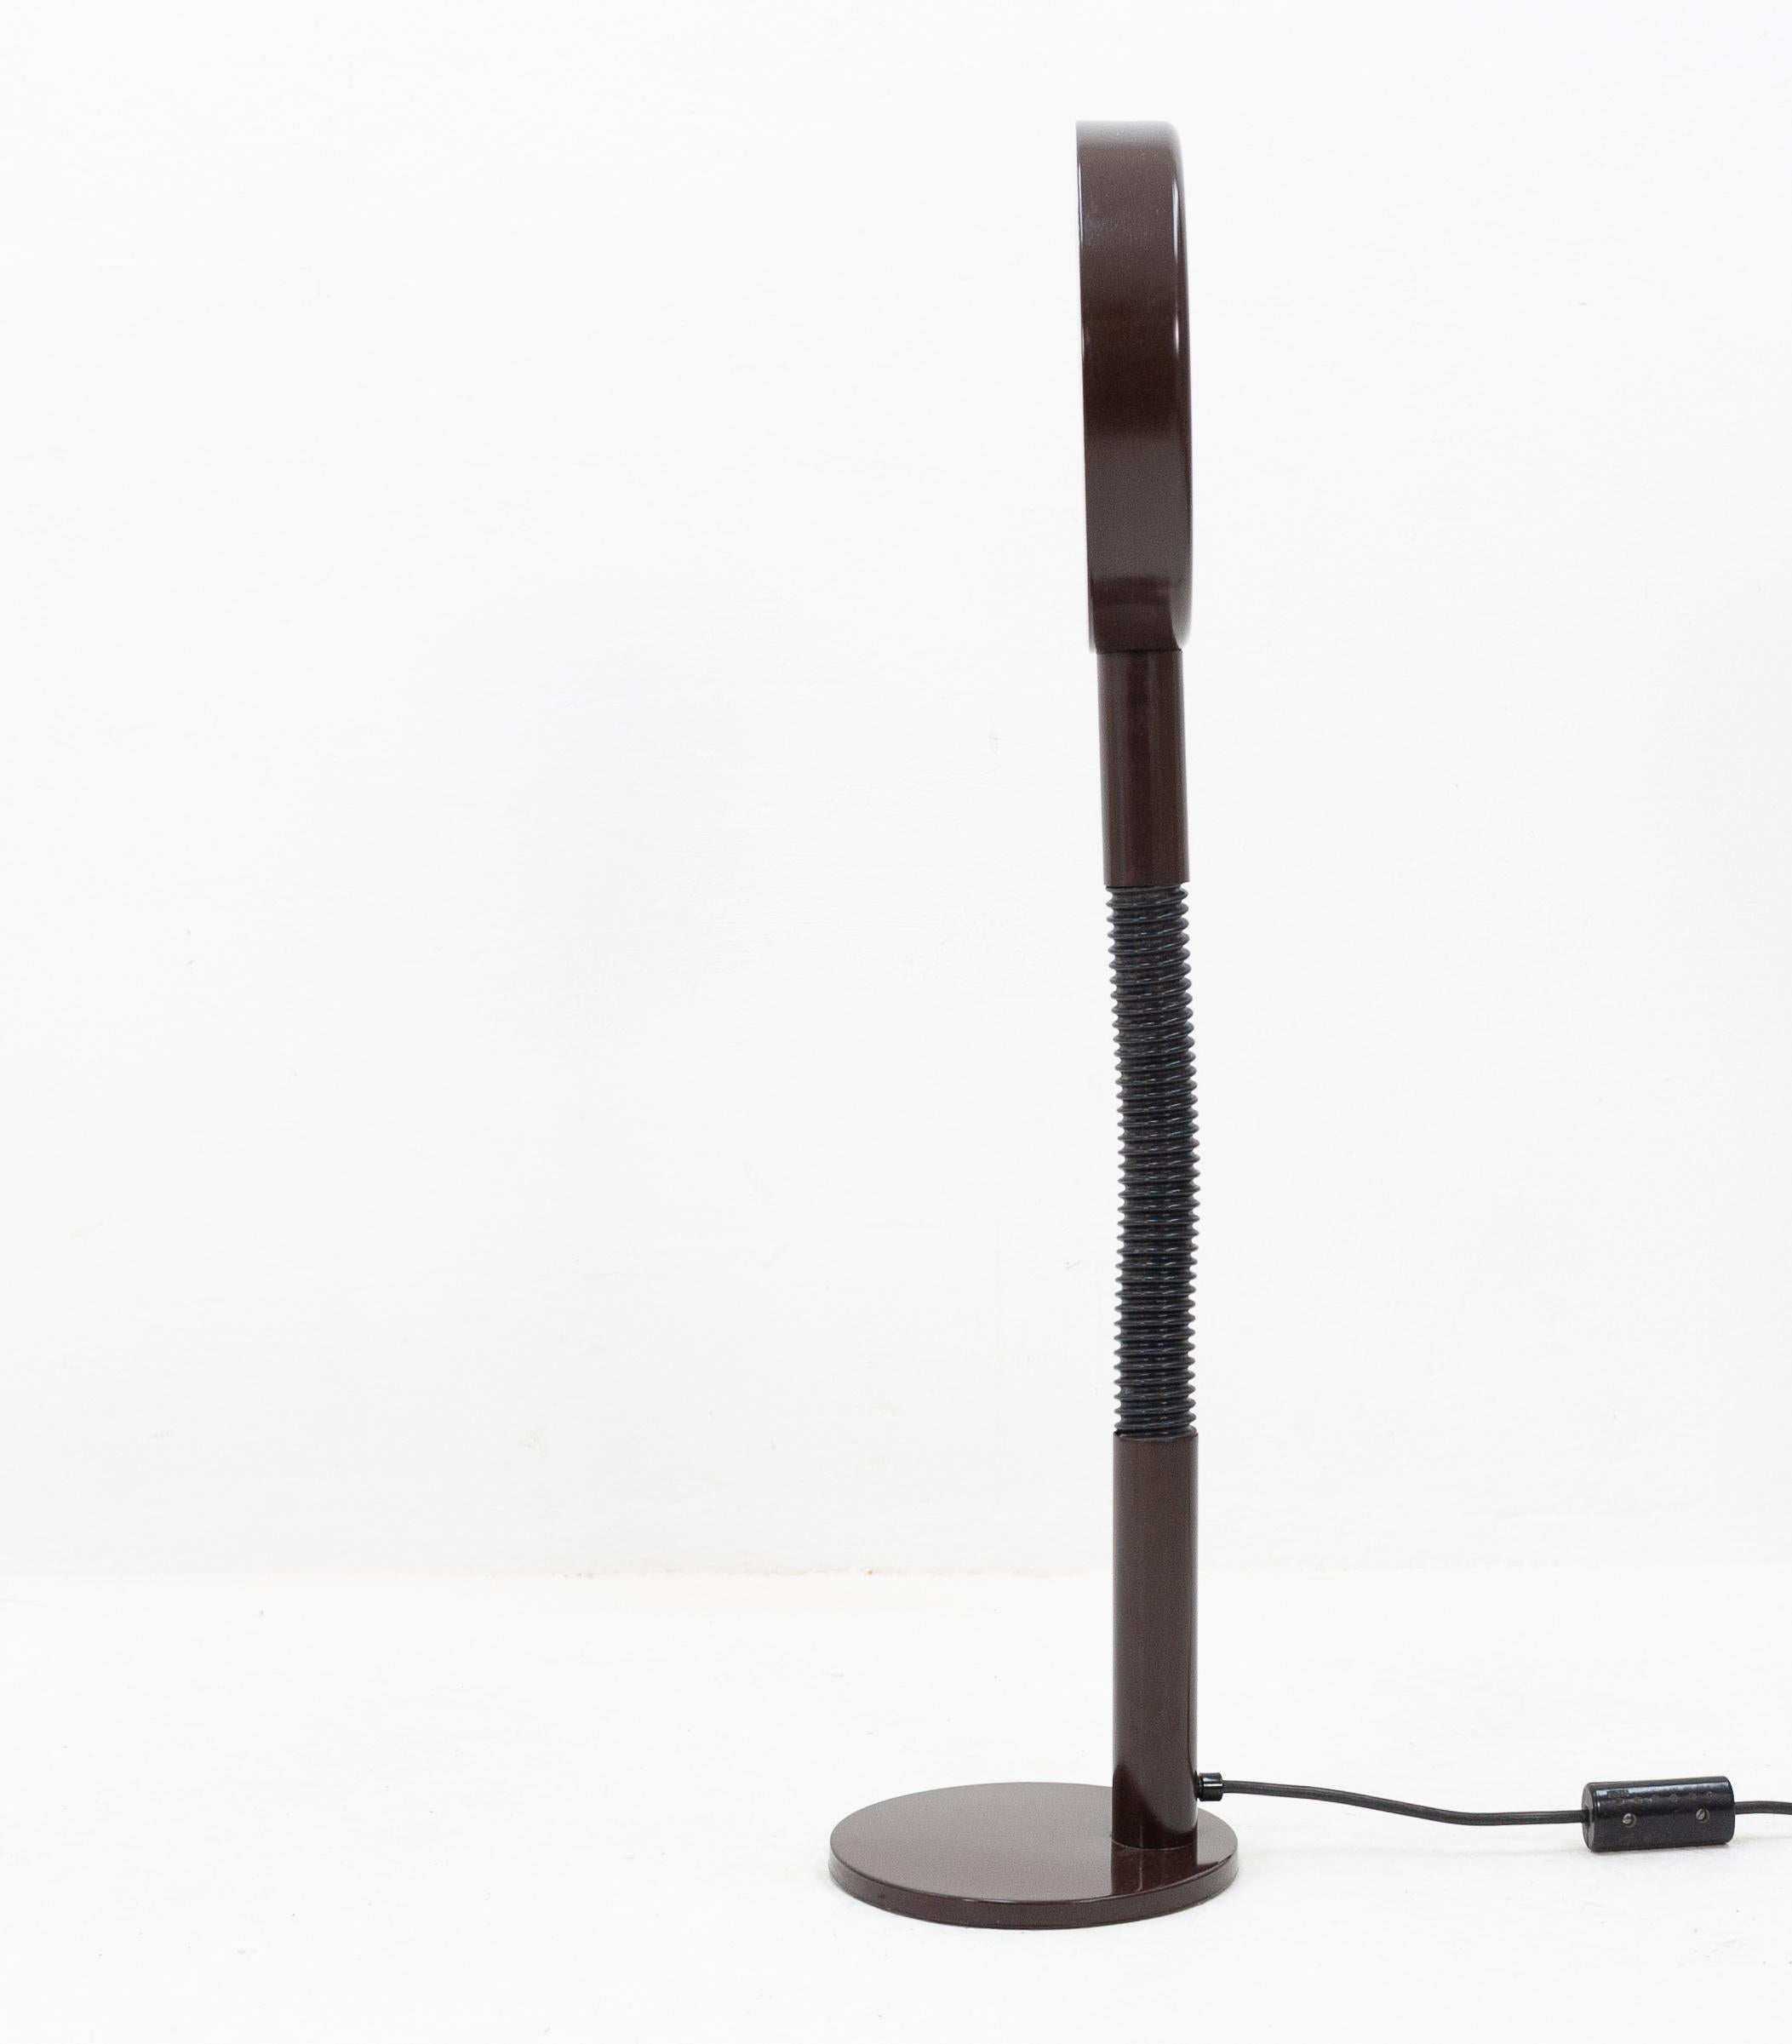 Hala Zeist 'frying pan' desk lamp in characteristic 1970s dark brown with a flexible arm. Very good condition .